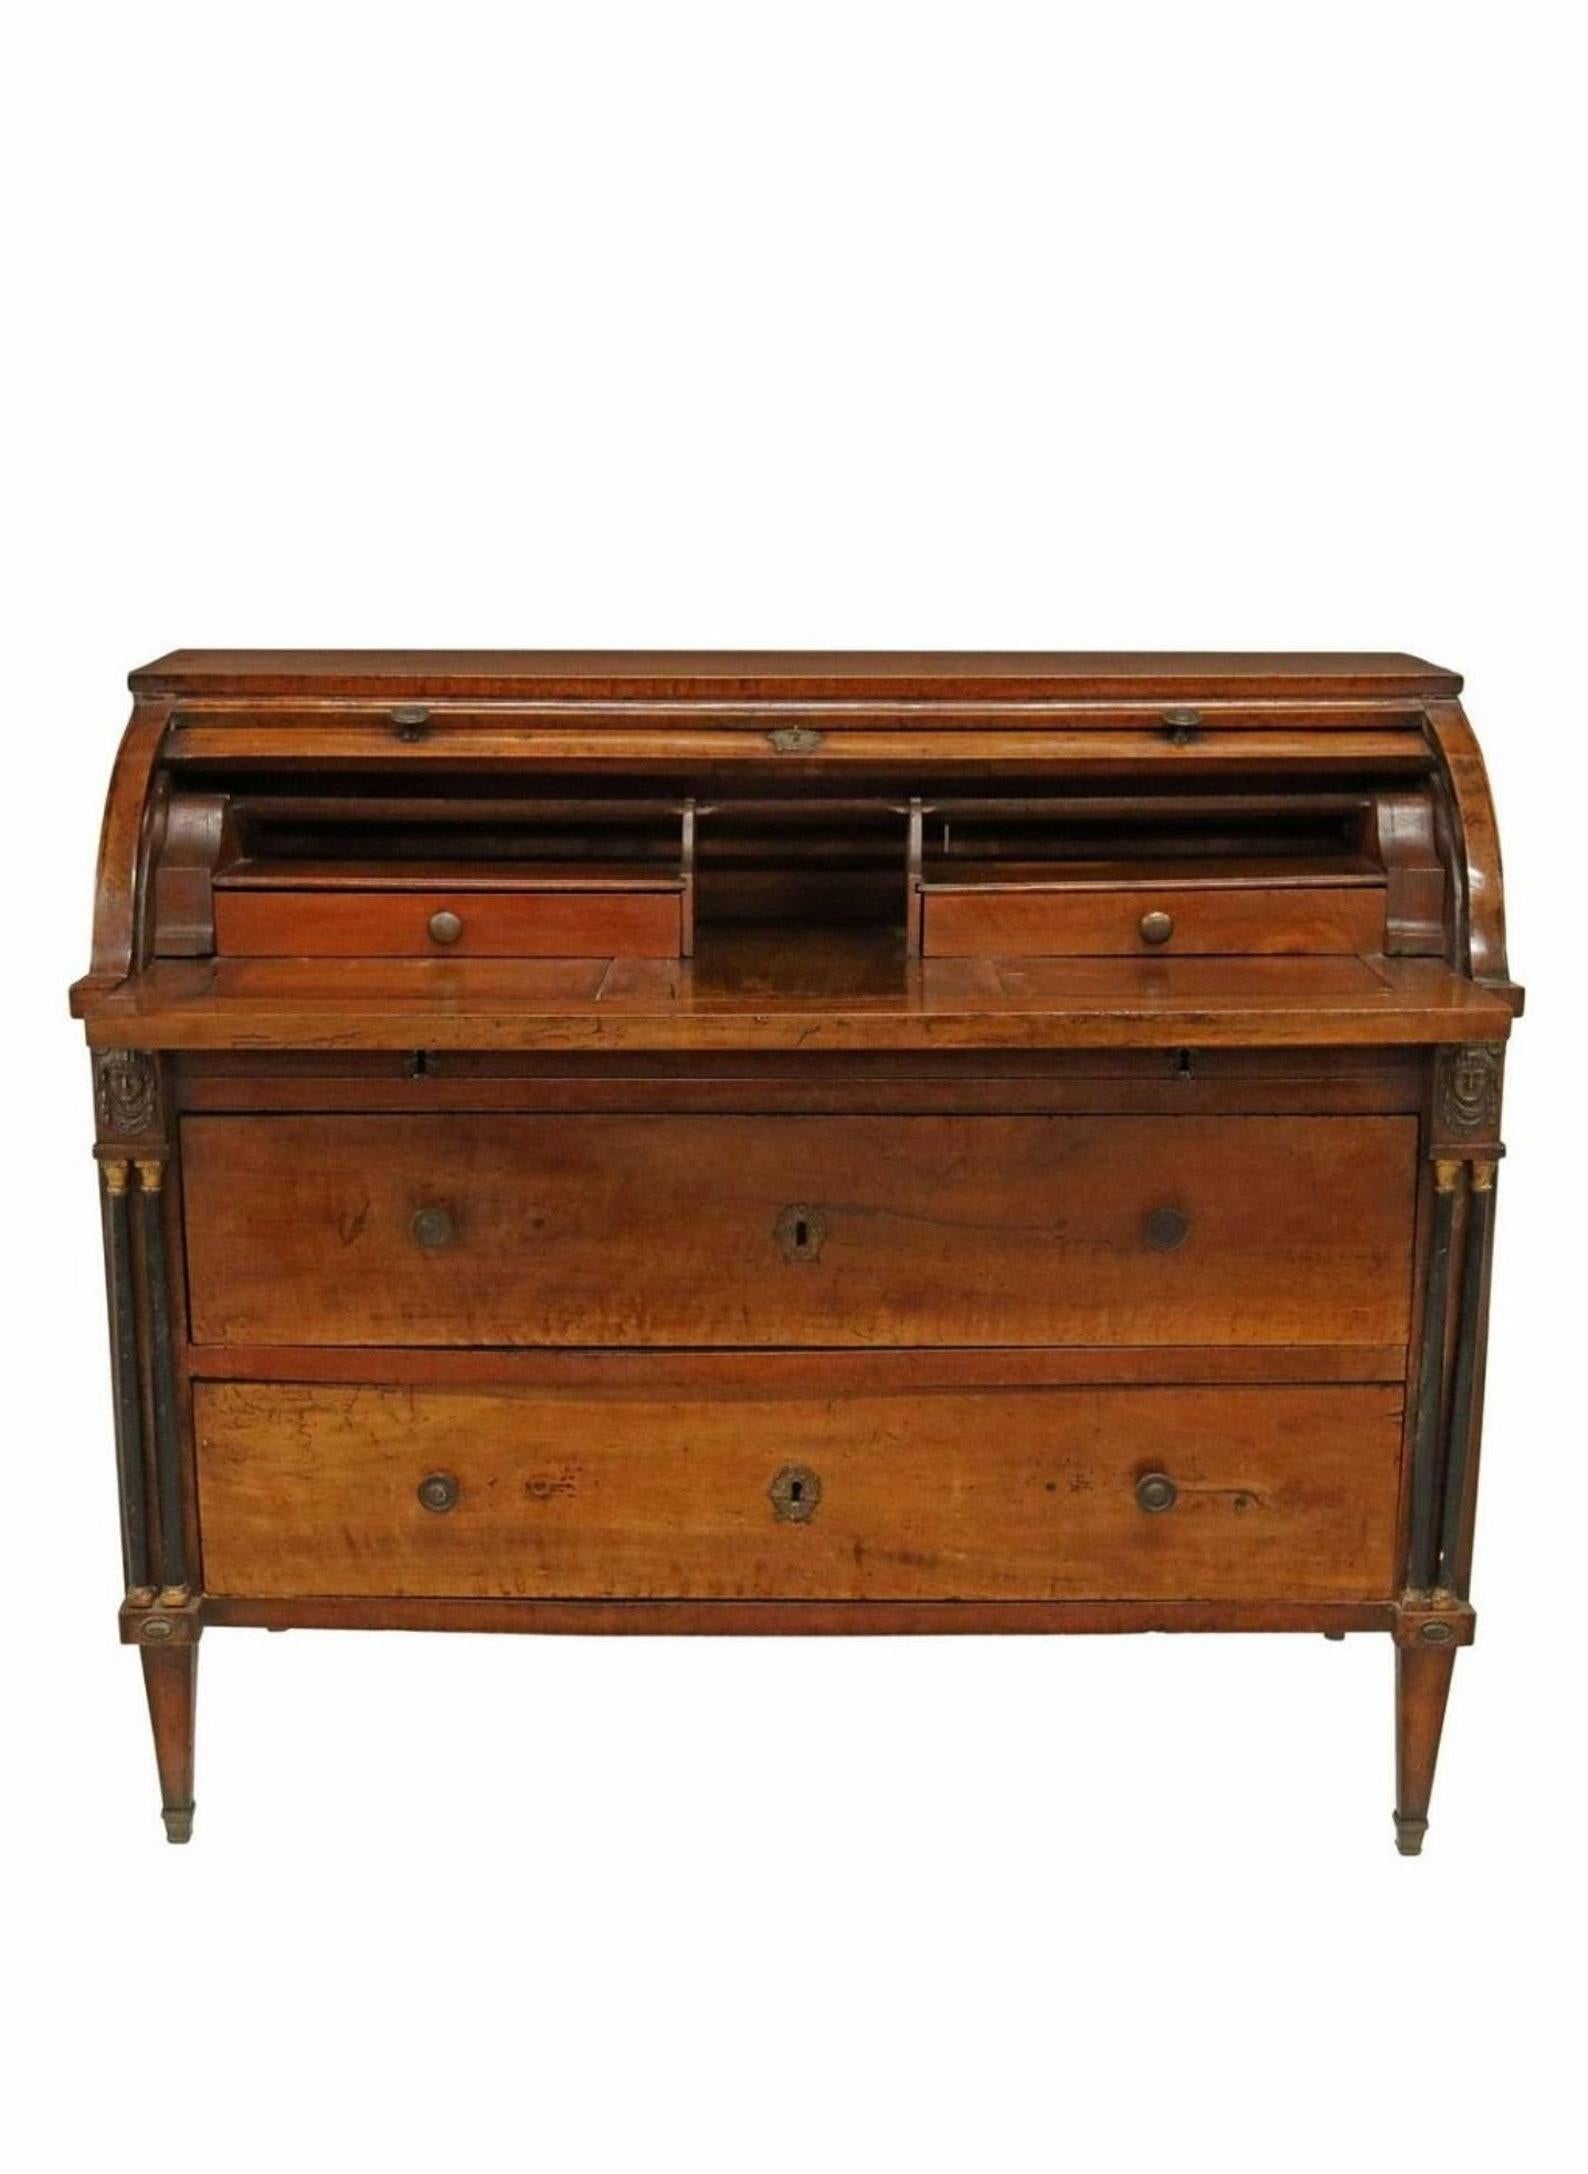 Hand-Crafted Early 19th Century French Empire Period Bureau a Cylindre Gentleman's Desk For Sale